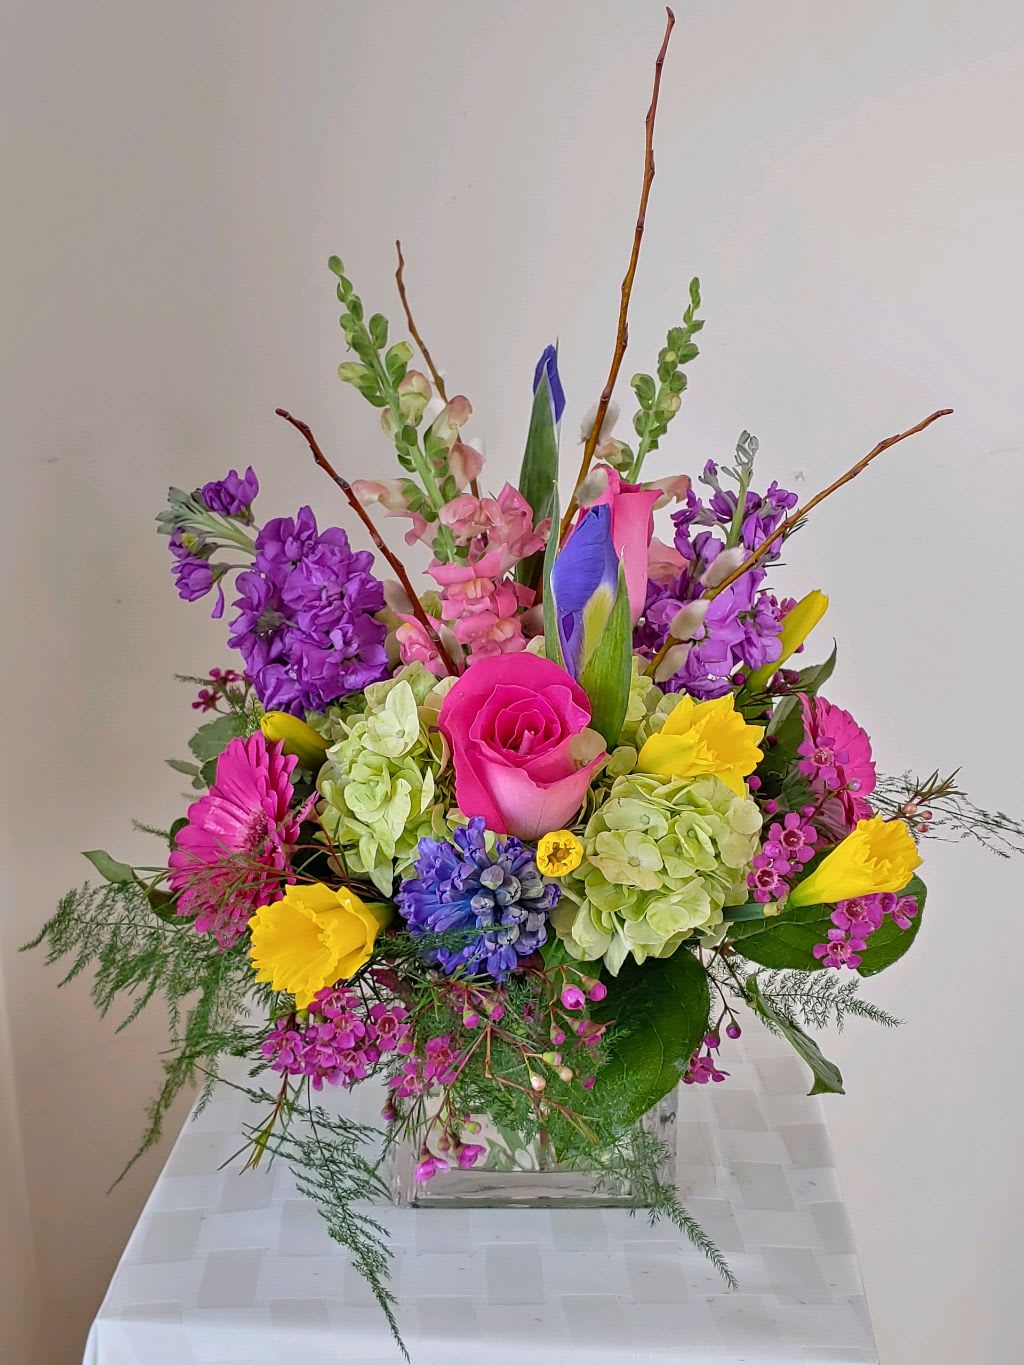 Green Hydrangea,Deep Lavender Stock,Yellow Daffodills,Hot Pink Rosesand Spring Pussywillows. - A clear cube arrangement with an assortement of spring flowers.